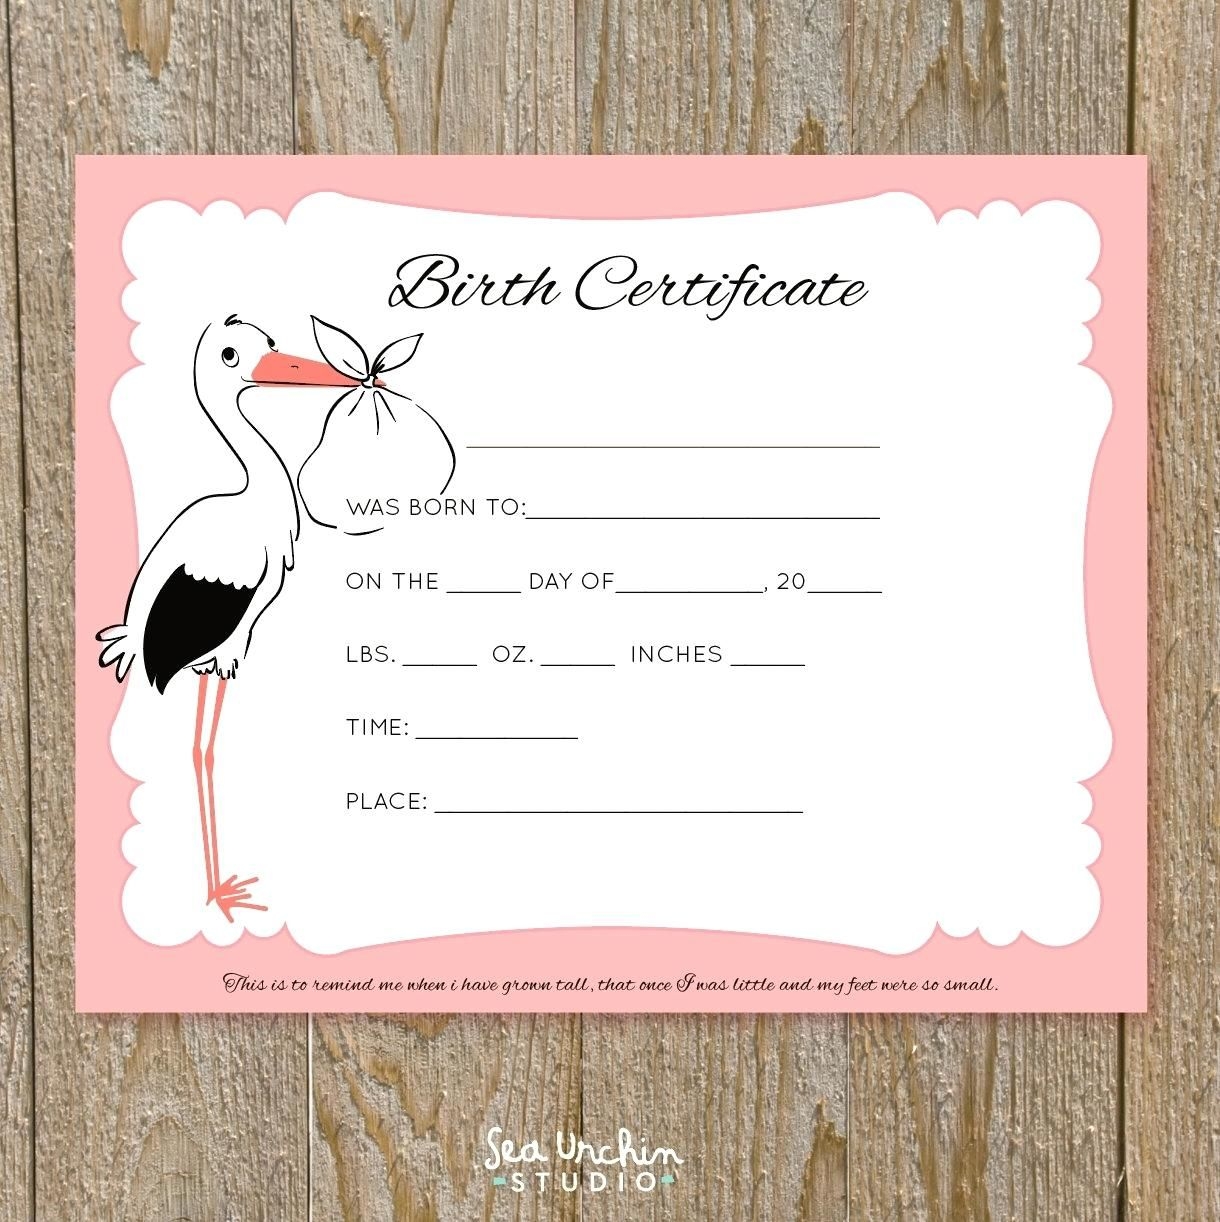 The Captivating Baby Doll Birth Certificate Template Or With Free Printable Regarding Baby D Birth Certificate Birth Certificate Template Certificate Templates